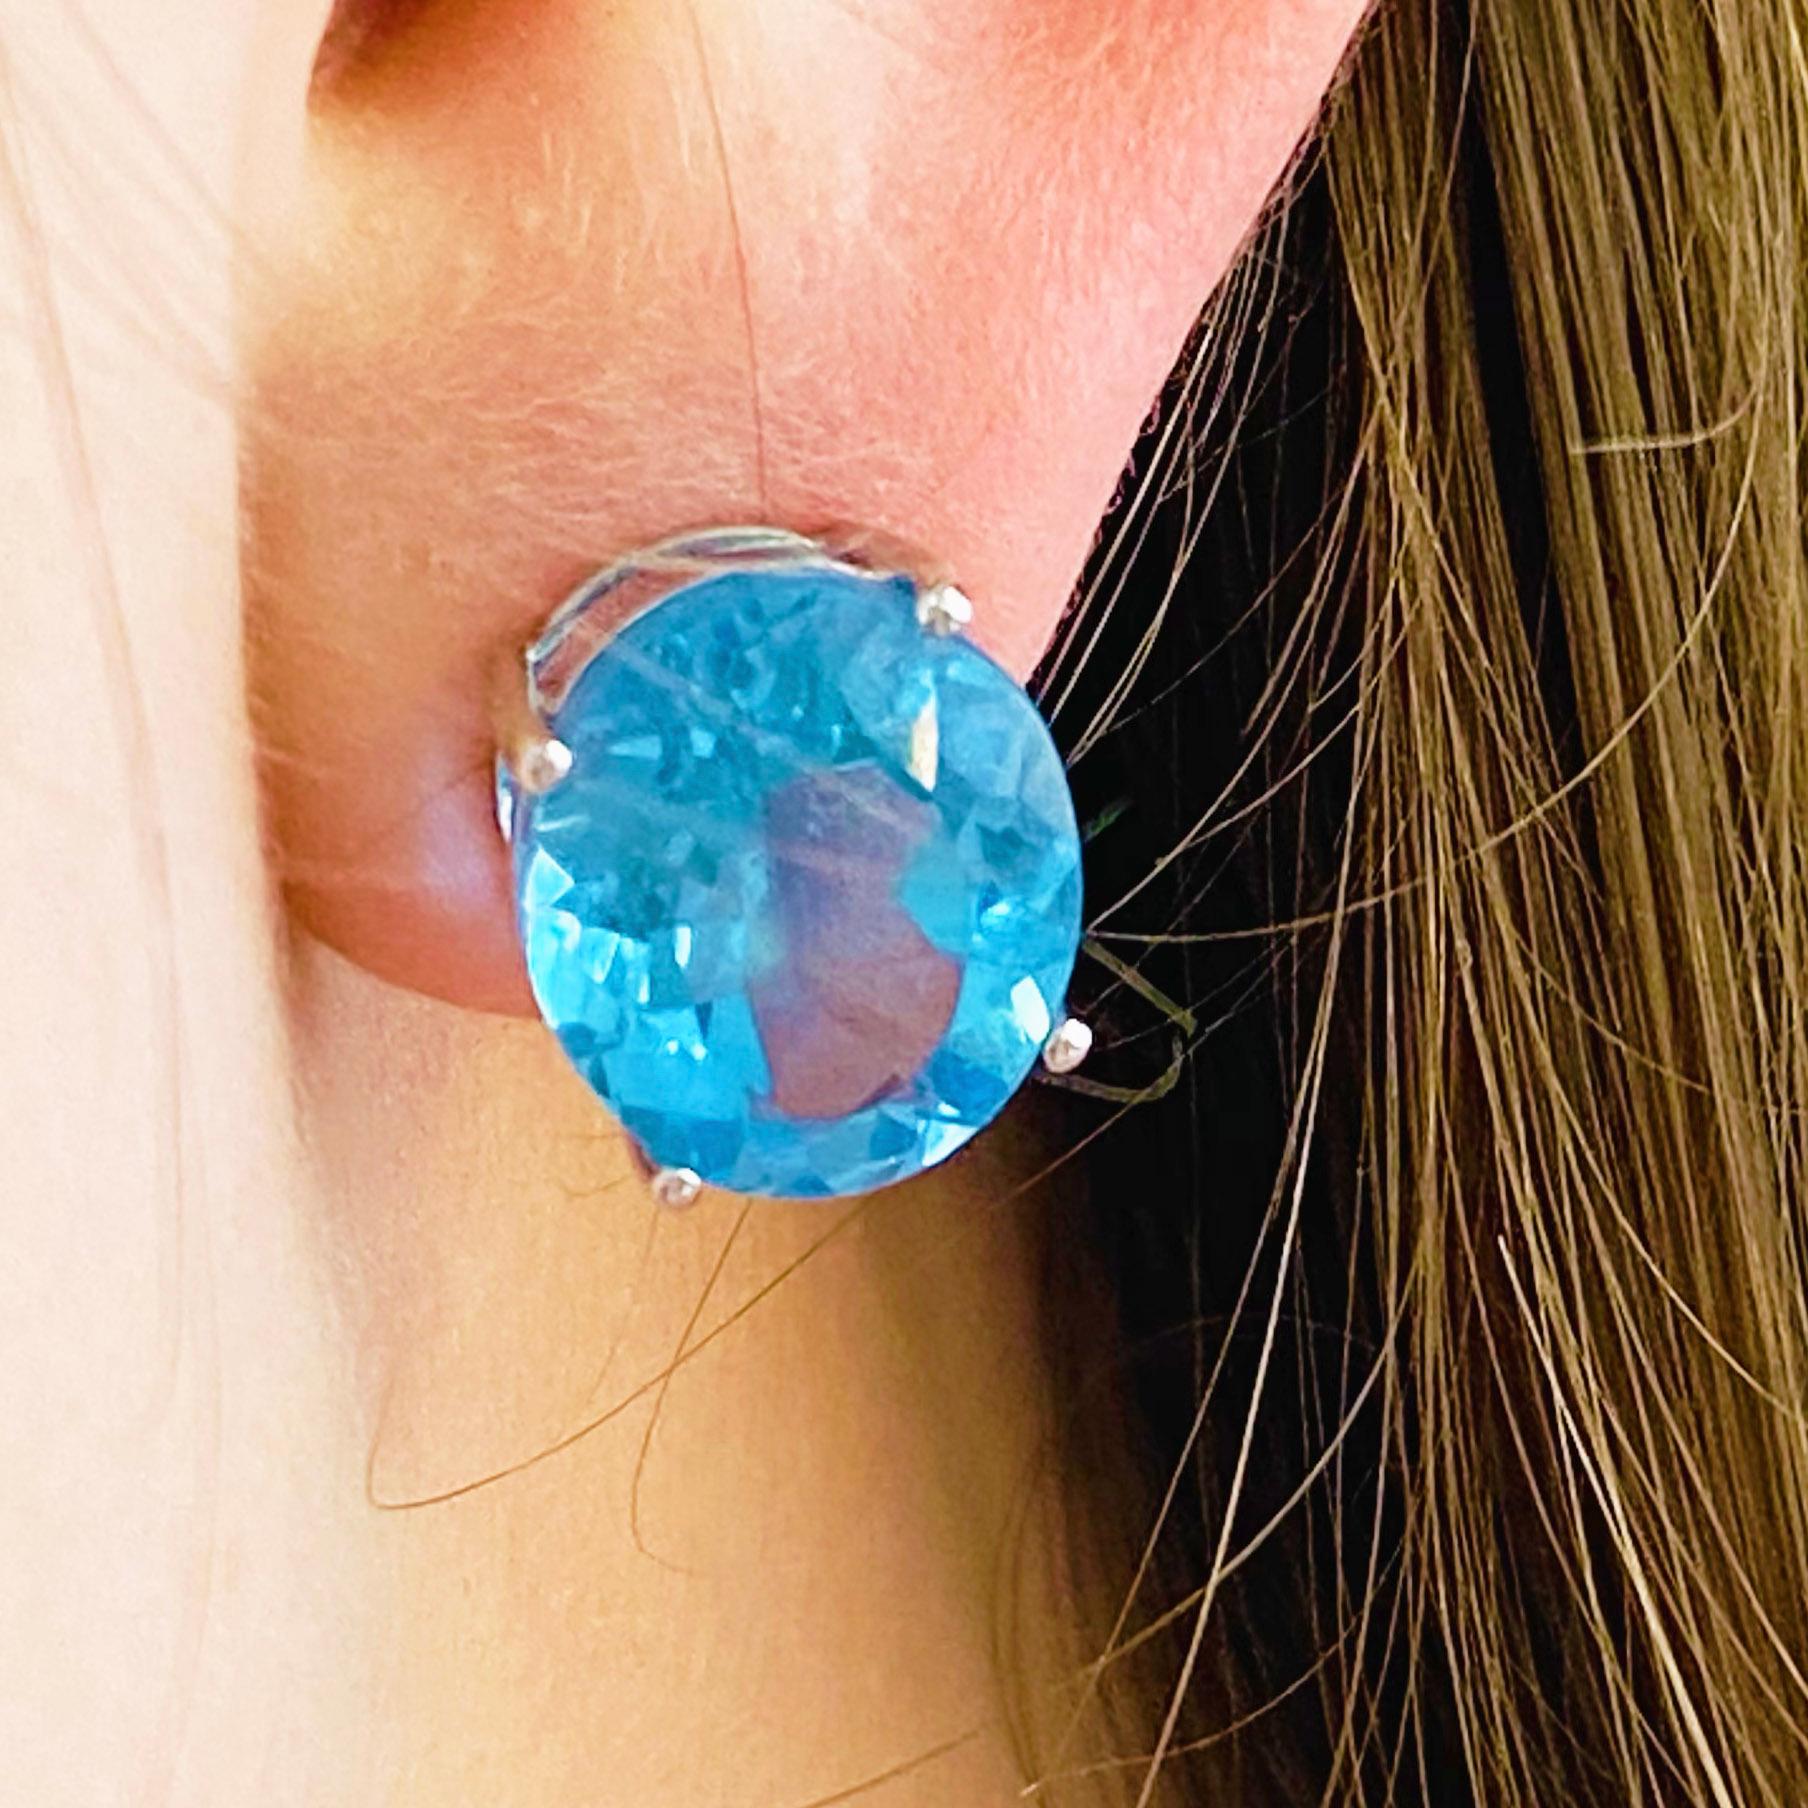 These blue topaz earrings are a modern design set in 14 karat white gold! Each earrings holds an oval cut, genuine blue topaz gemstone set in four white gold prongs. Blue topaz is the birthstone for December making these the perfect birthday gift or